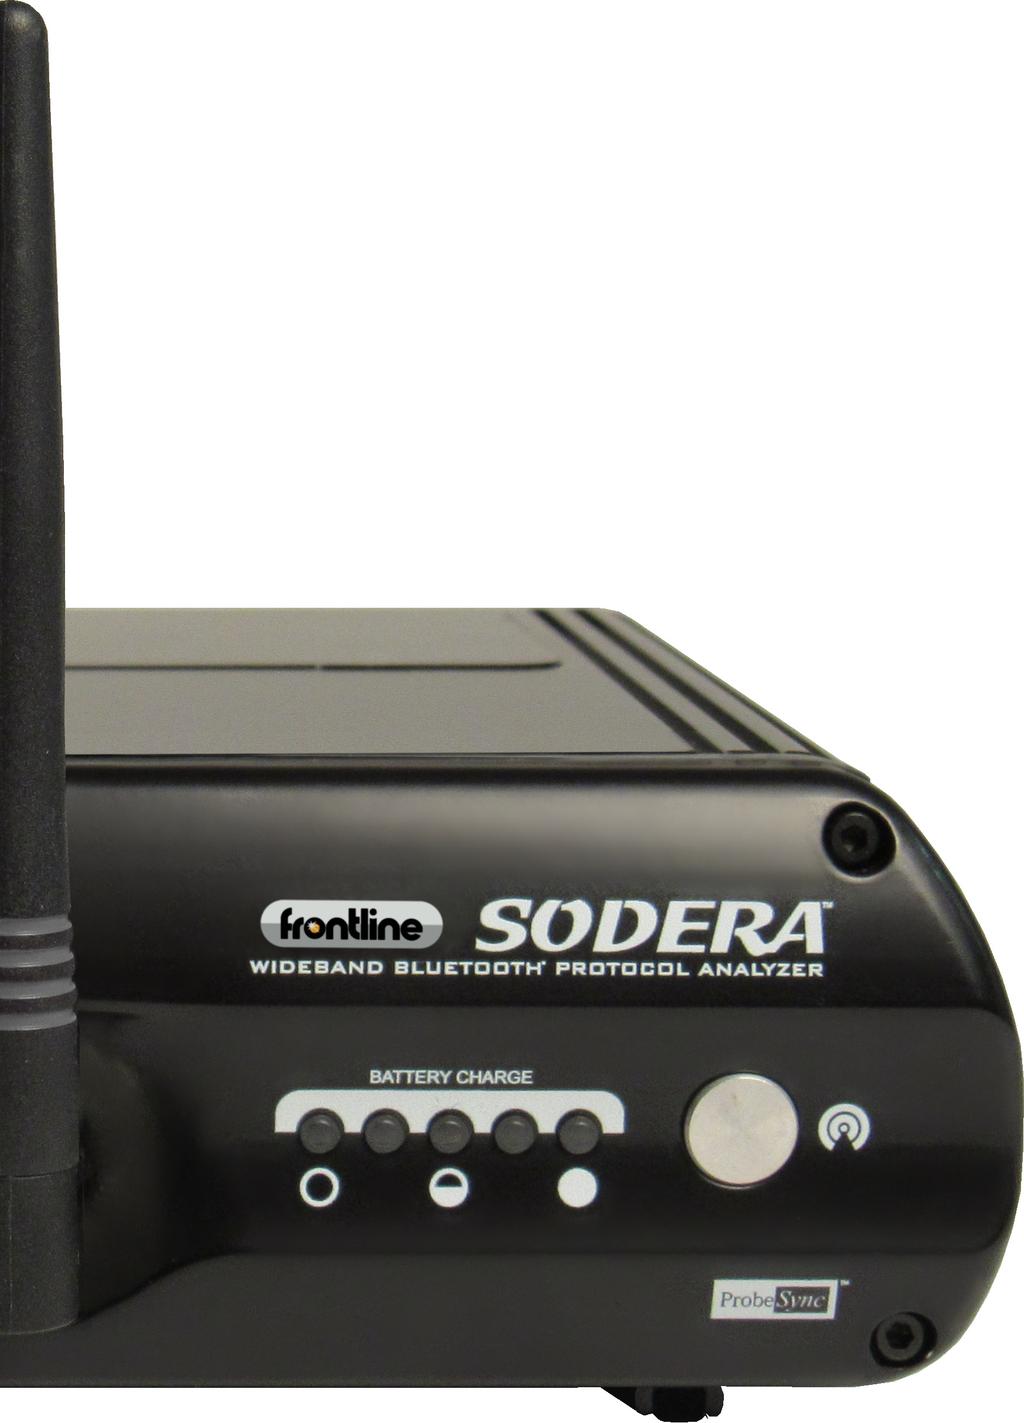 Bluetooth Protocol Analyzer With one click, Frontline Sodera captures every Bluetooth channel of your environment in the 2.4 GHz band completely and effortlessly.